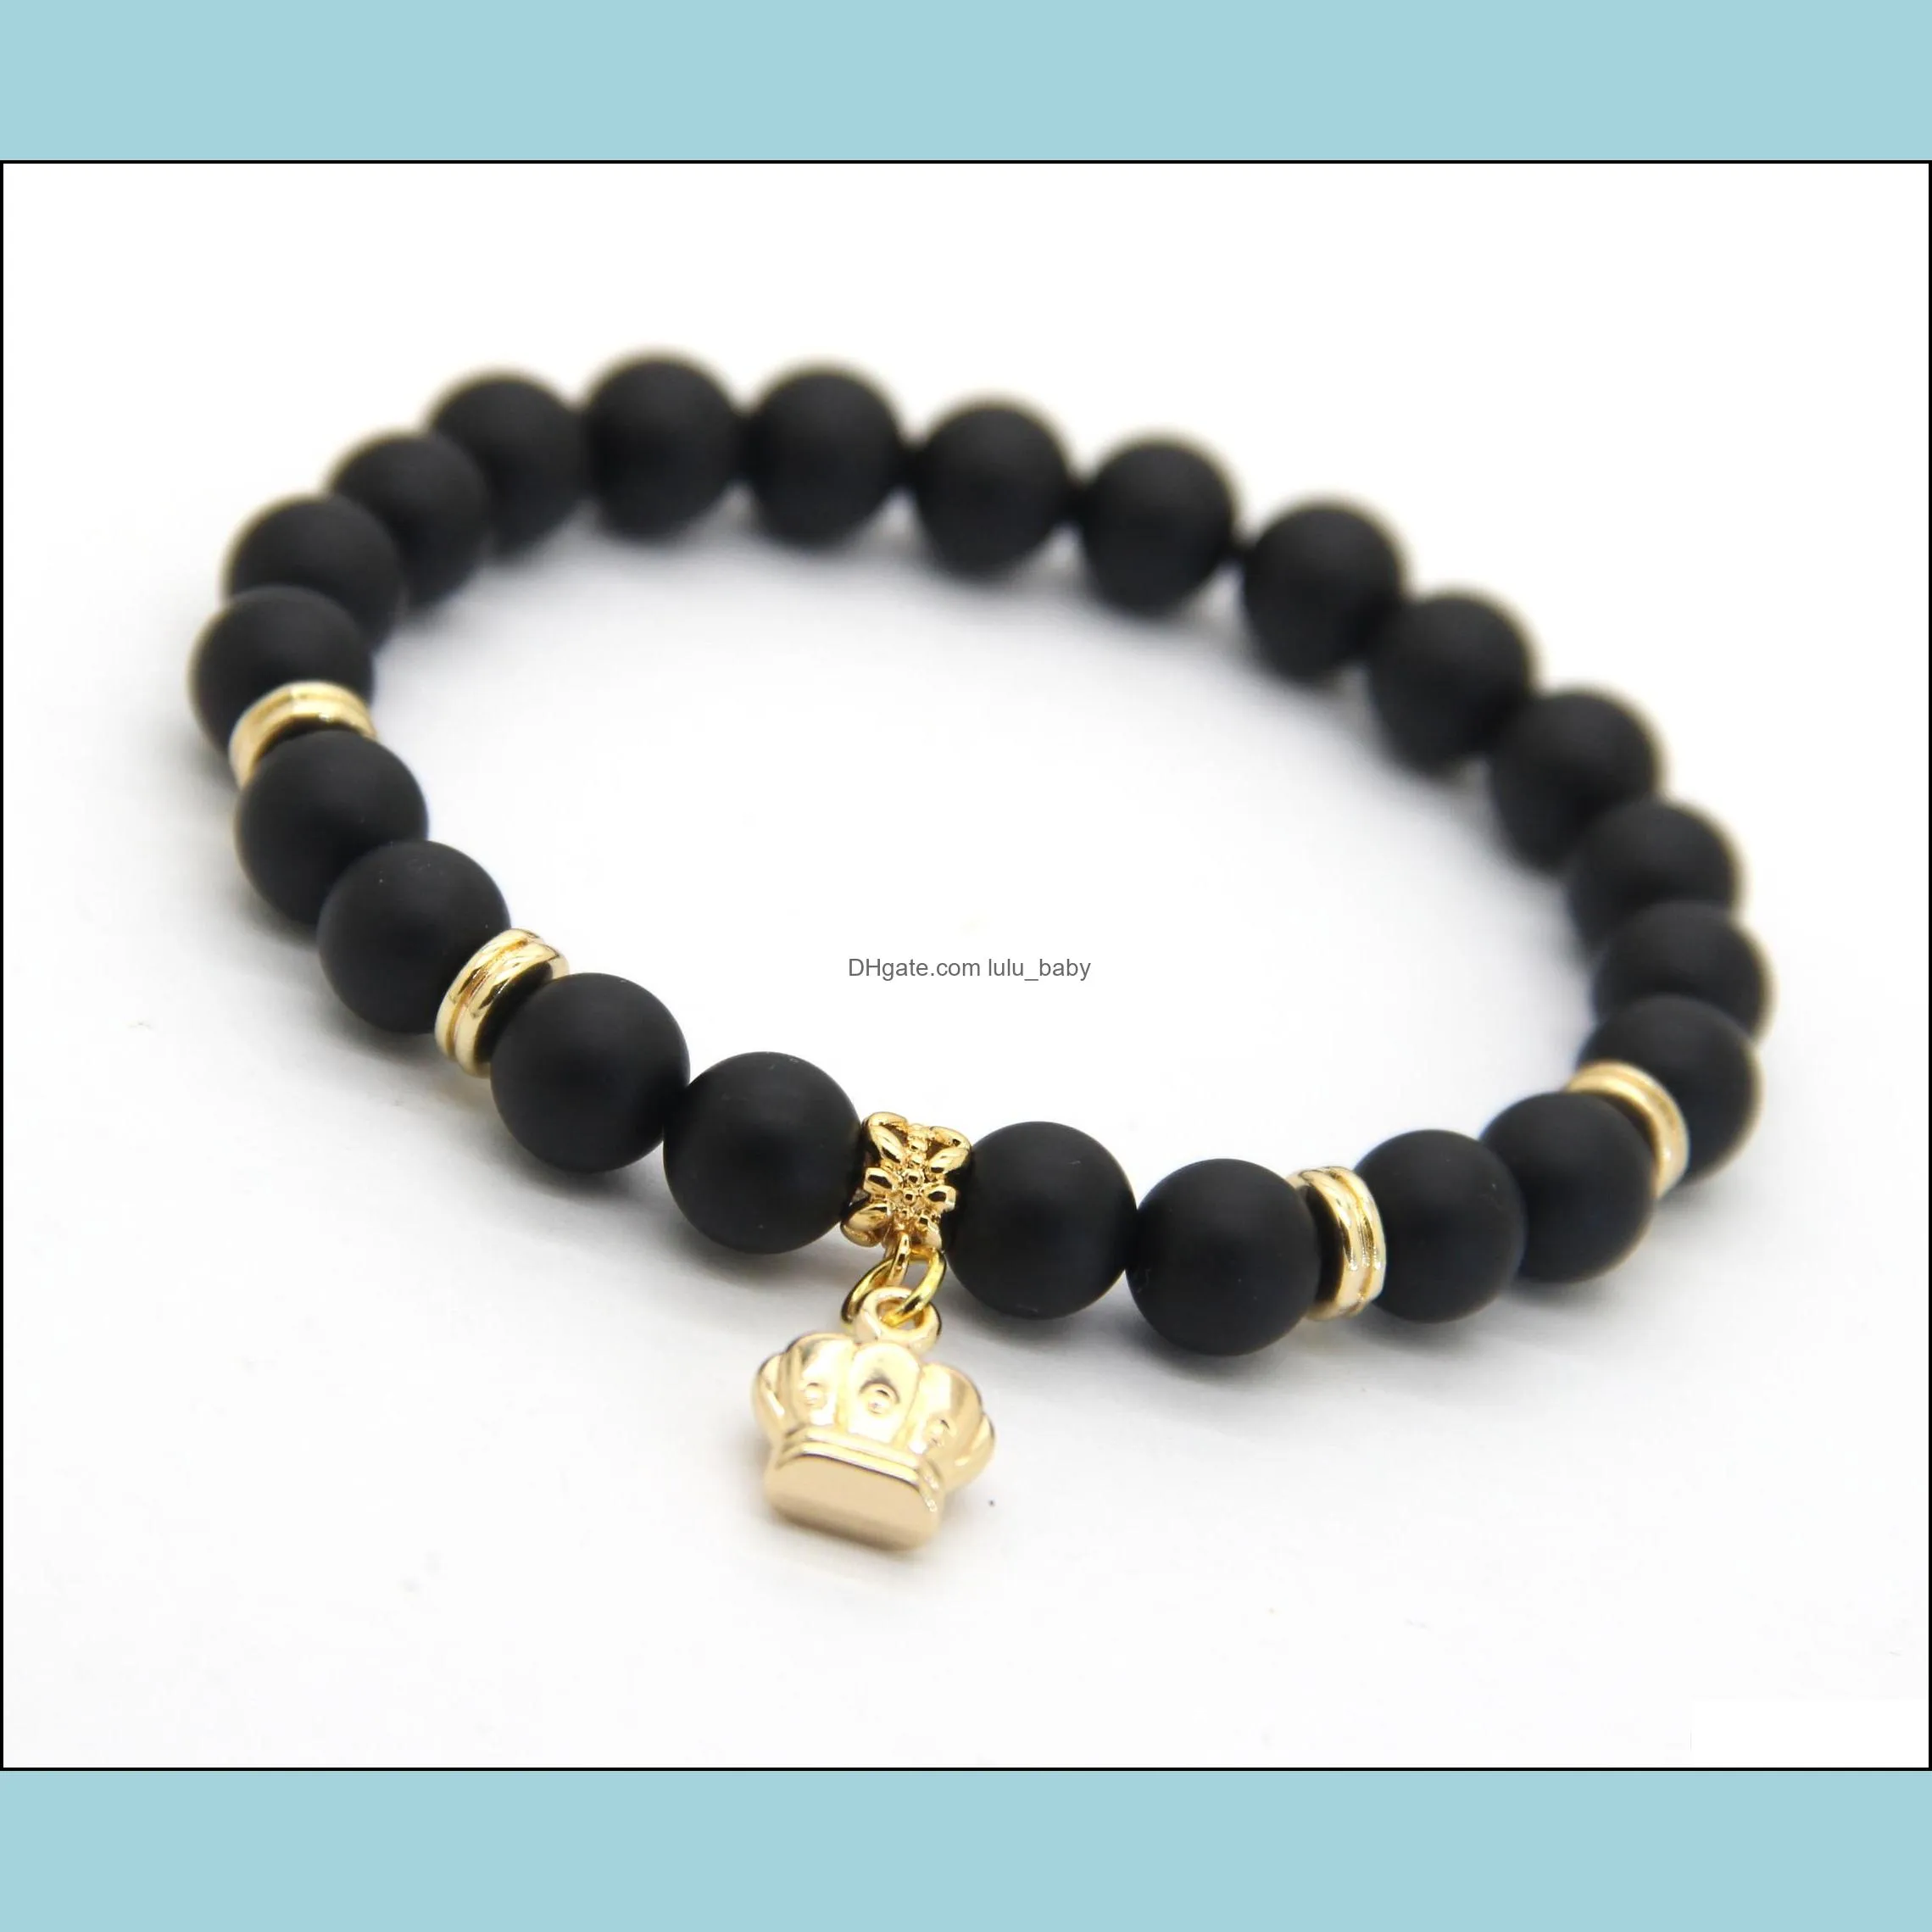  arrival stone jewelry wholesale 8mm real matte onyx stone beads with crown bracelets party gift